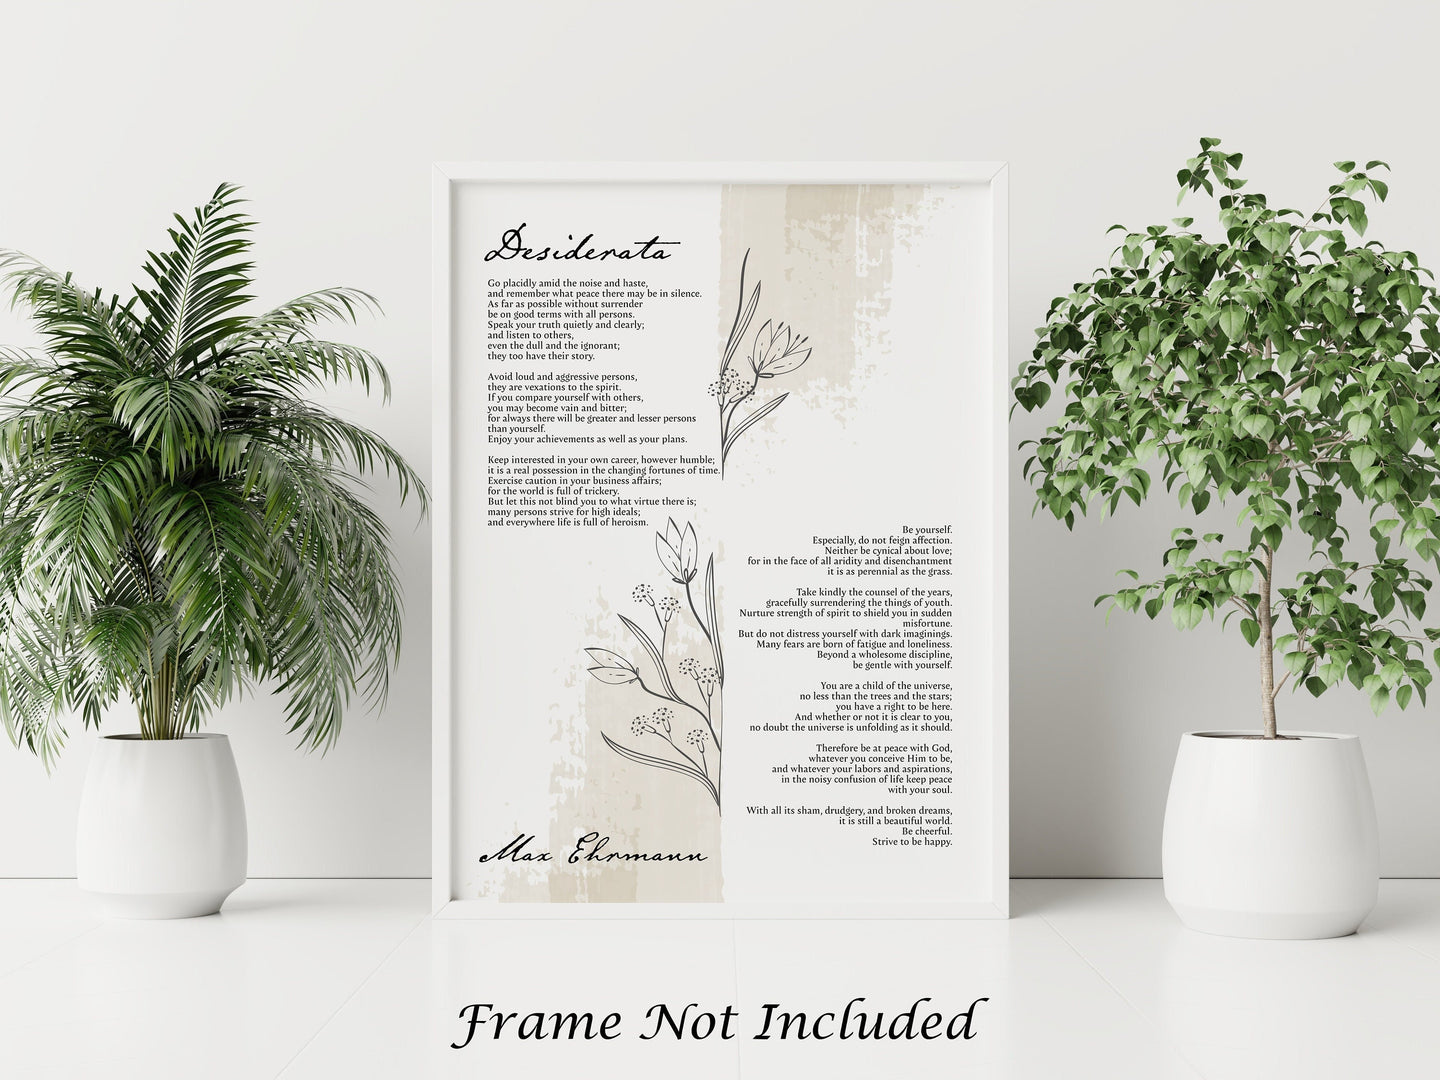 Desiderata Poem Print - Poem By Max Ehrmann - Physical Print With or Without Frame